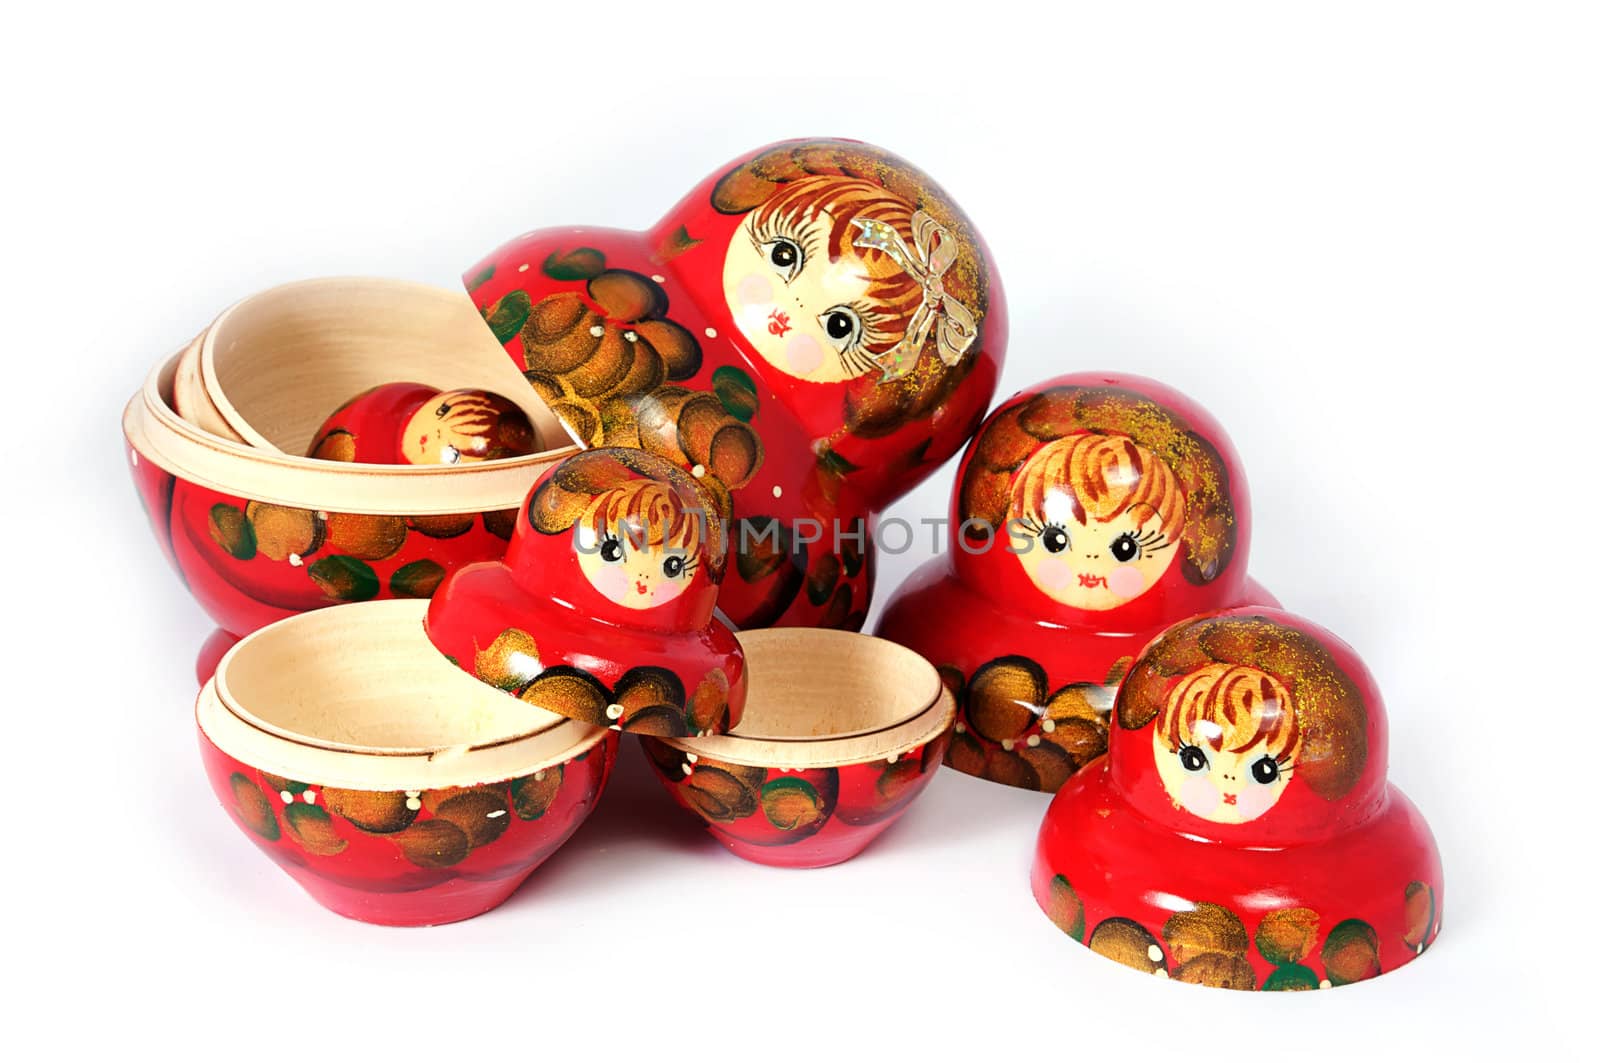 Opened Russian doll on white background.